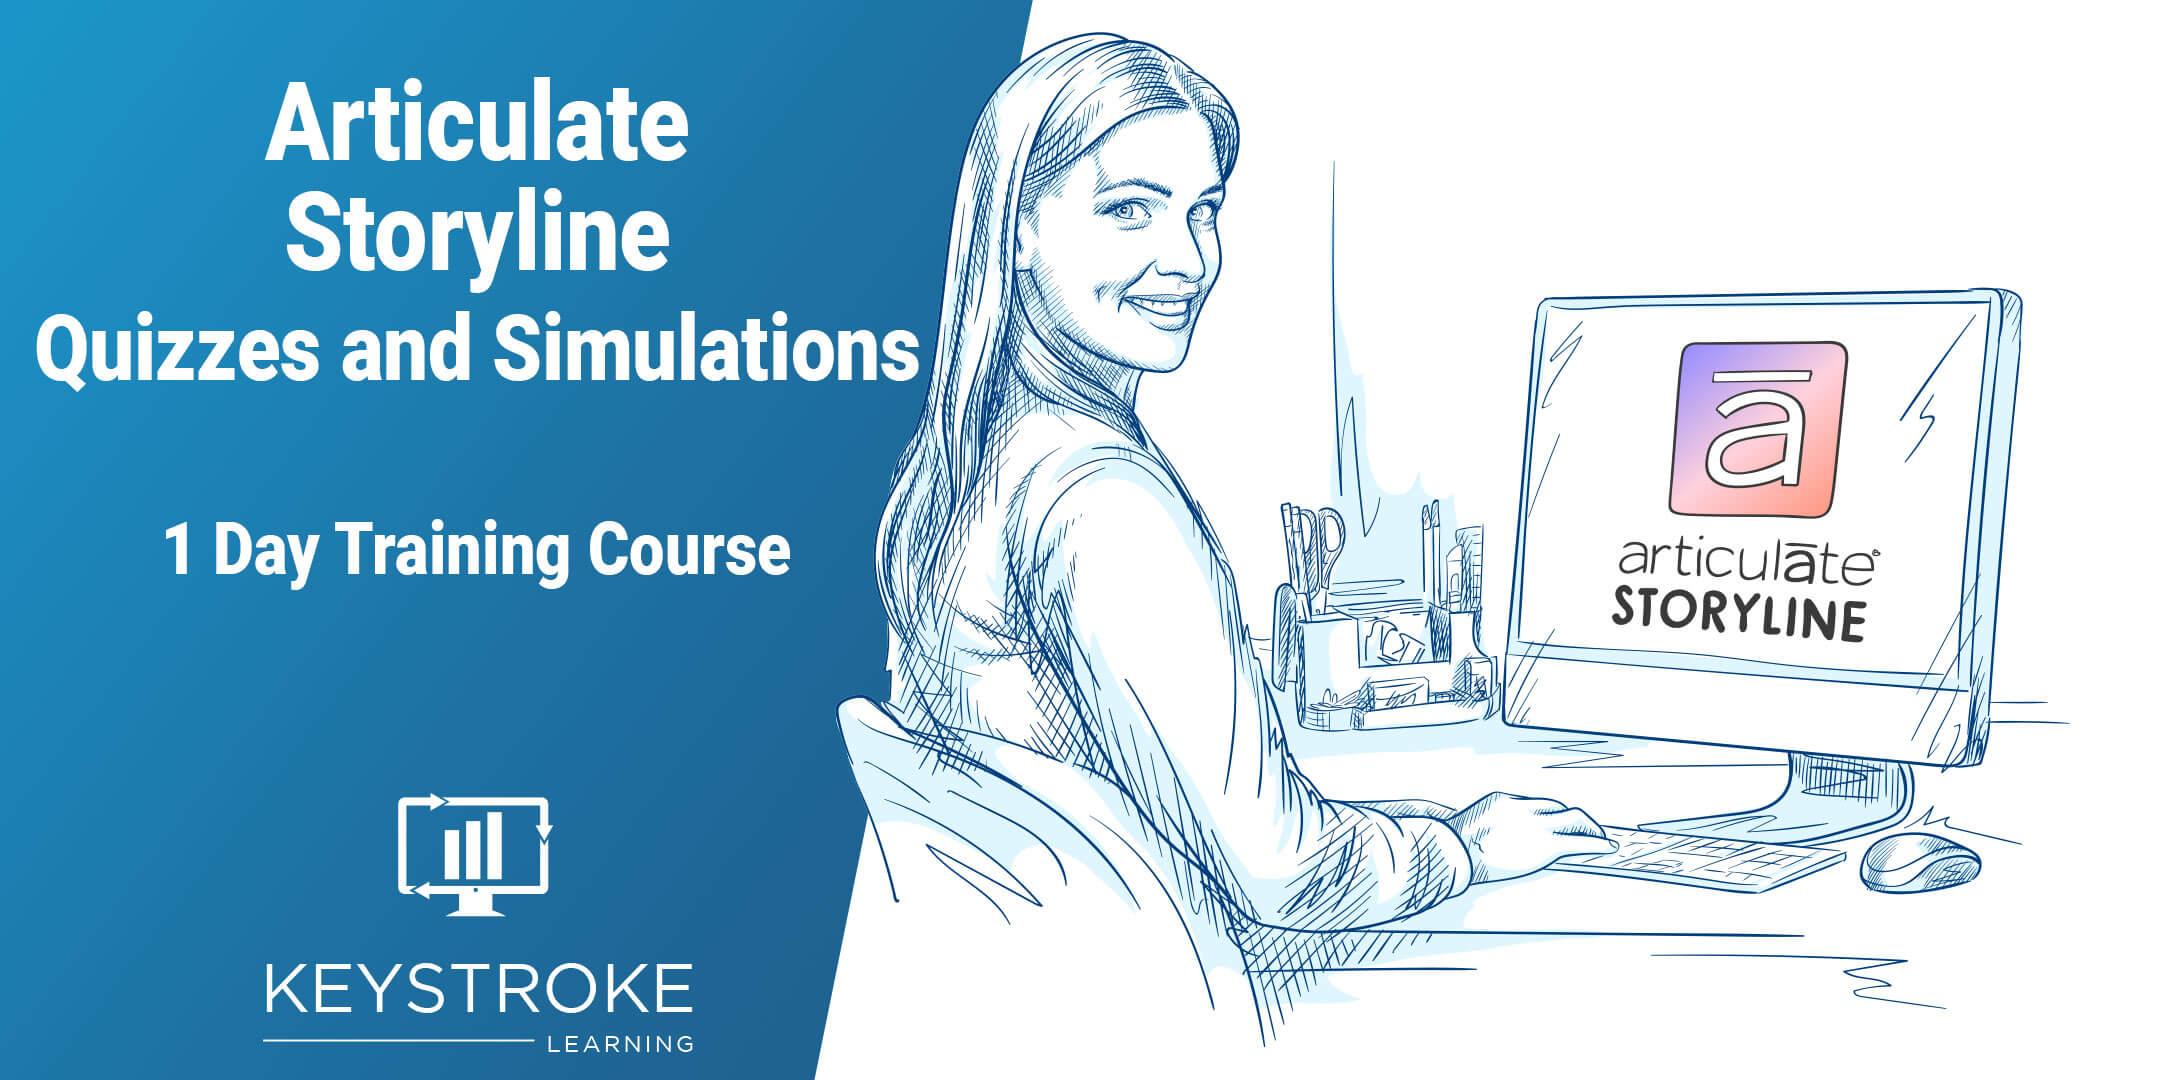 Articulate Storyline Quizzes and Simulations Workshop